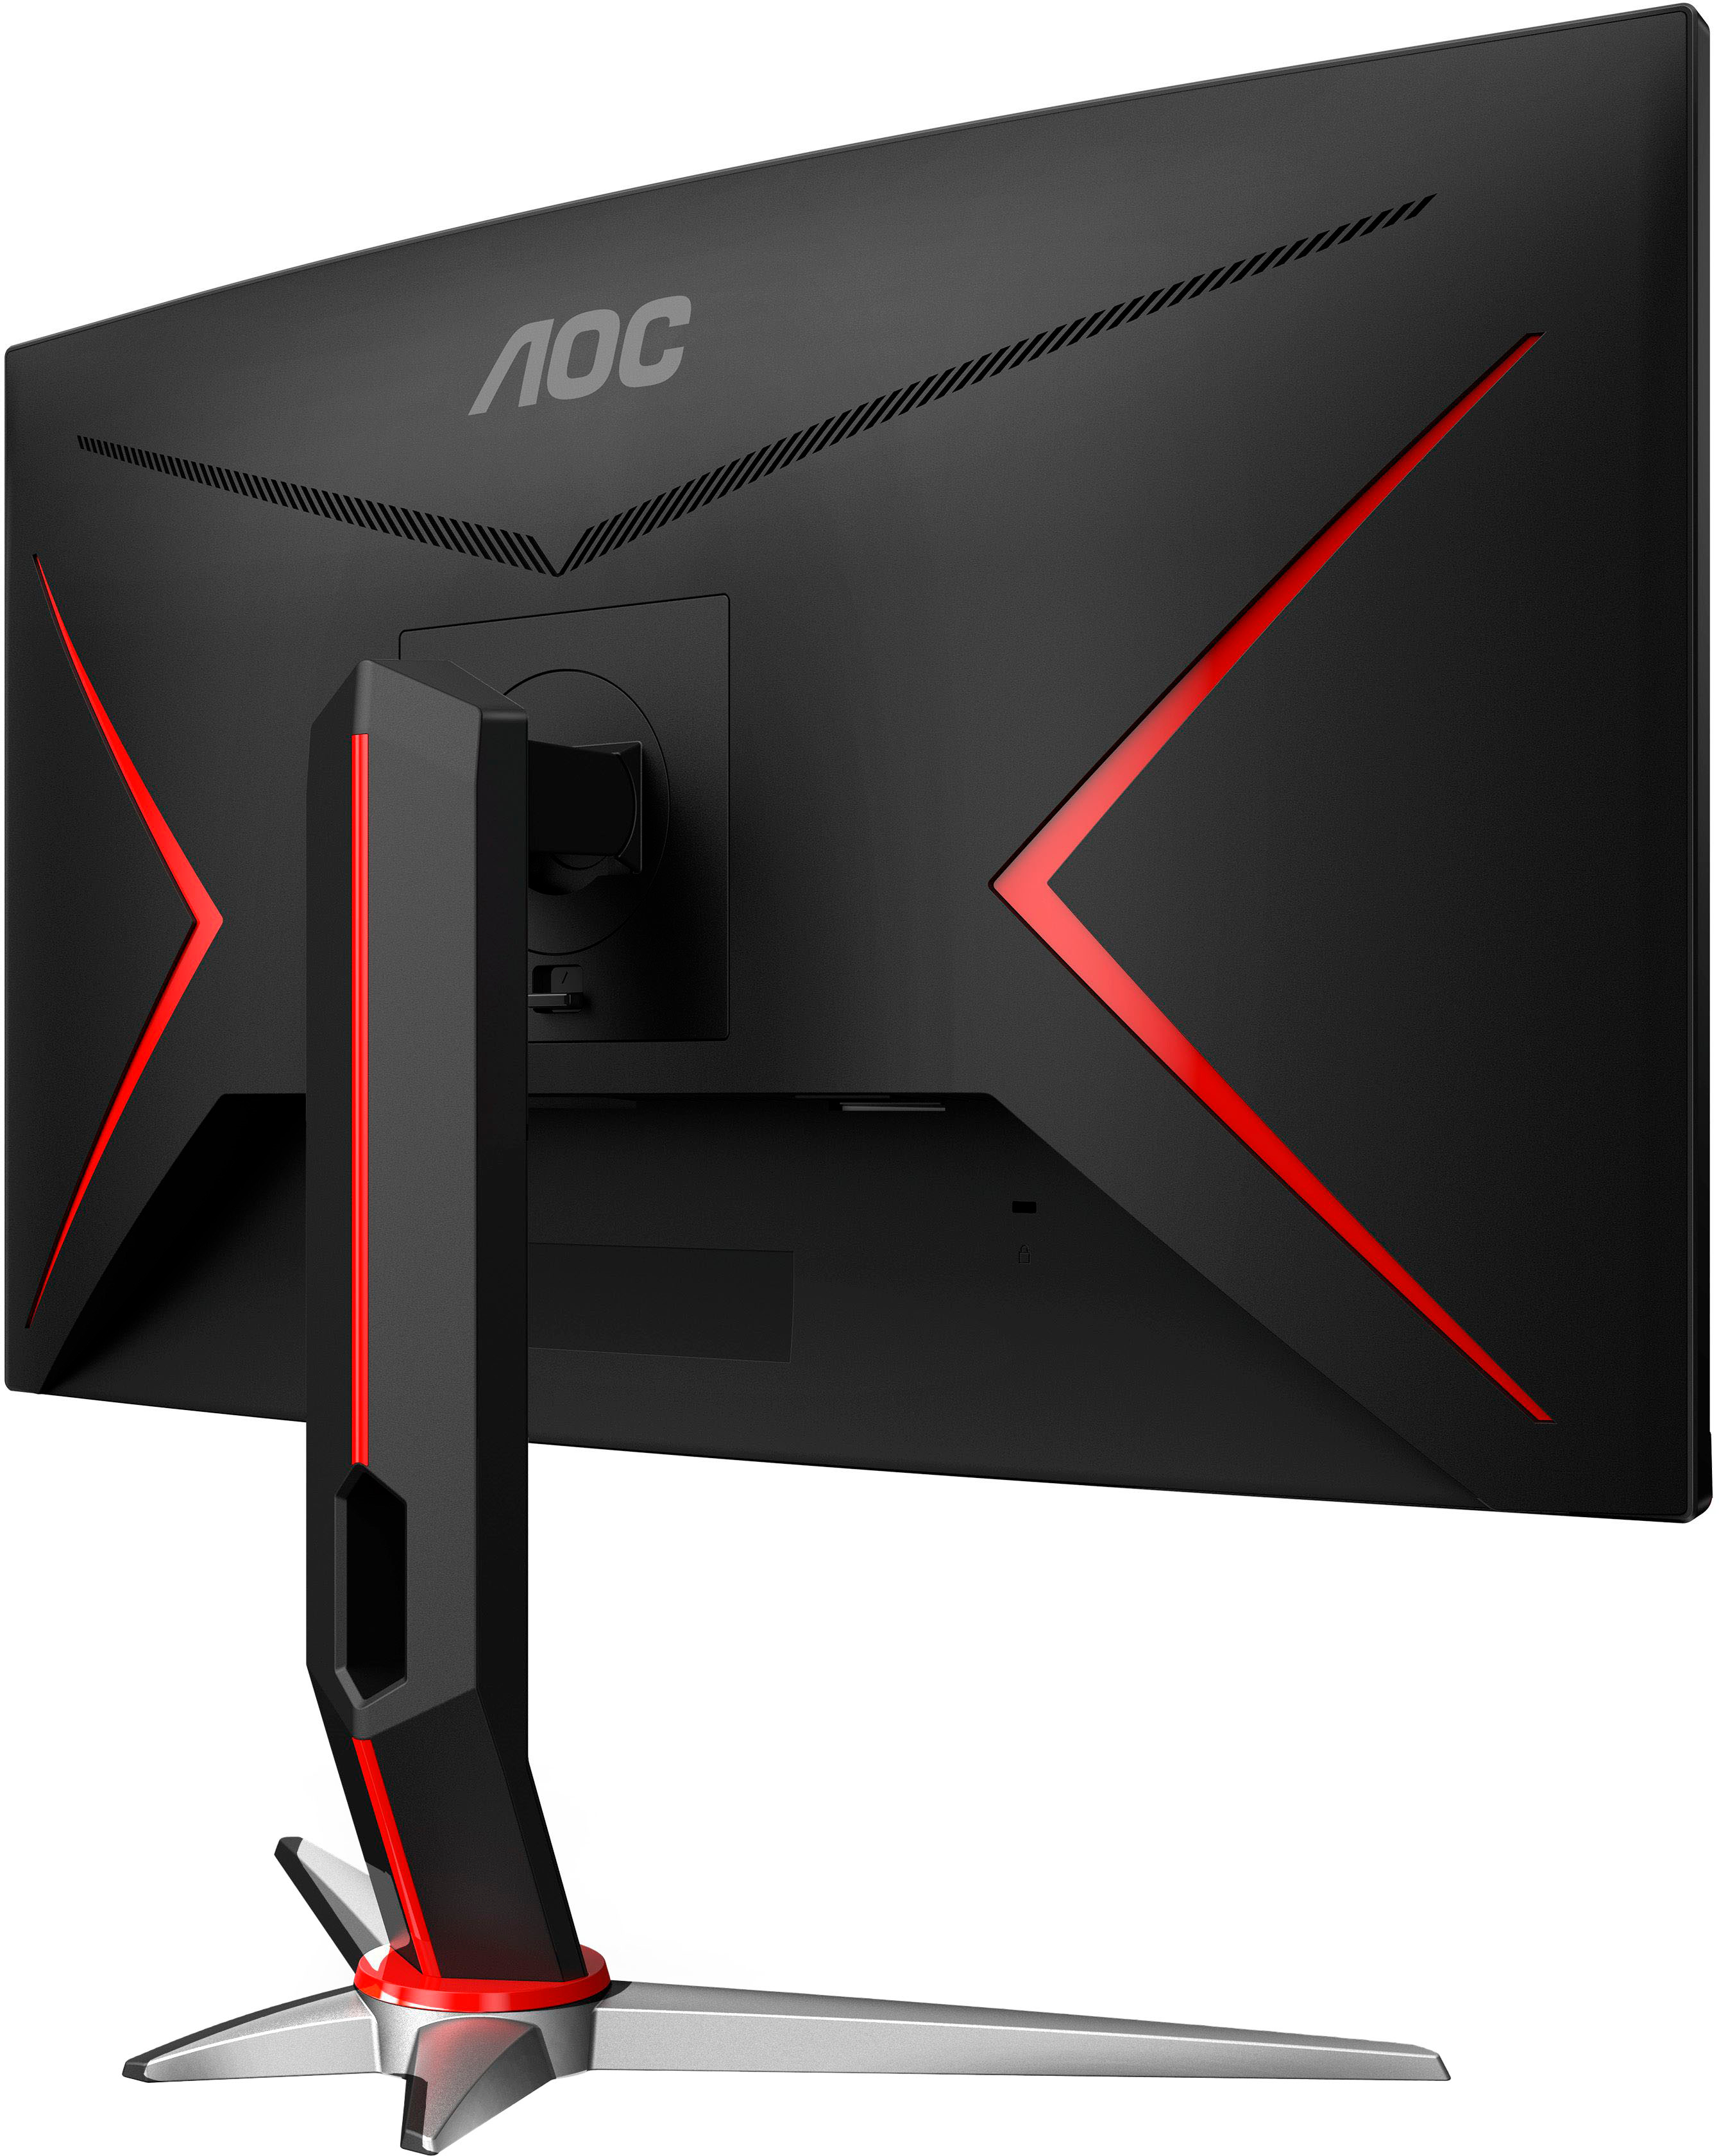 AOC 24G2 24 inch Full HD (1920x1080) Flat Panel-IPS Refresh rate-144hz  Response time-1ms Gaming Monitor - New Vision - Computer Parts Store